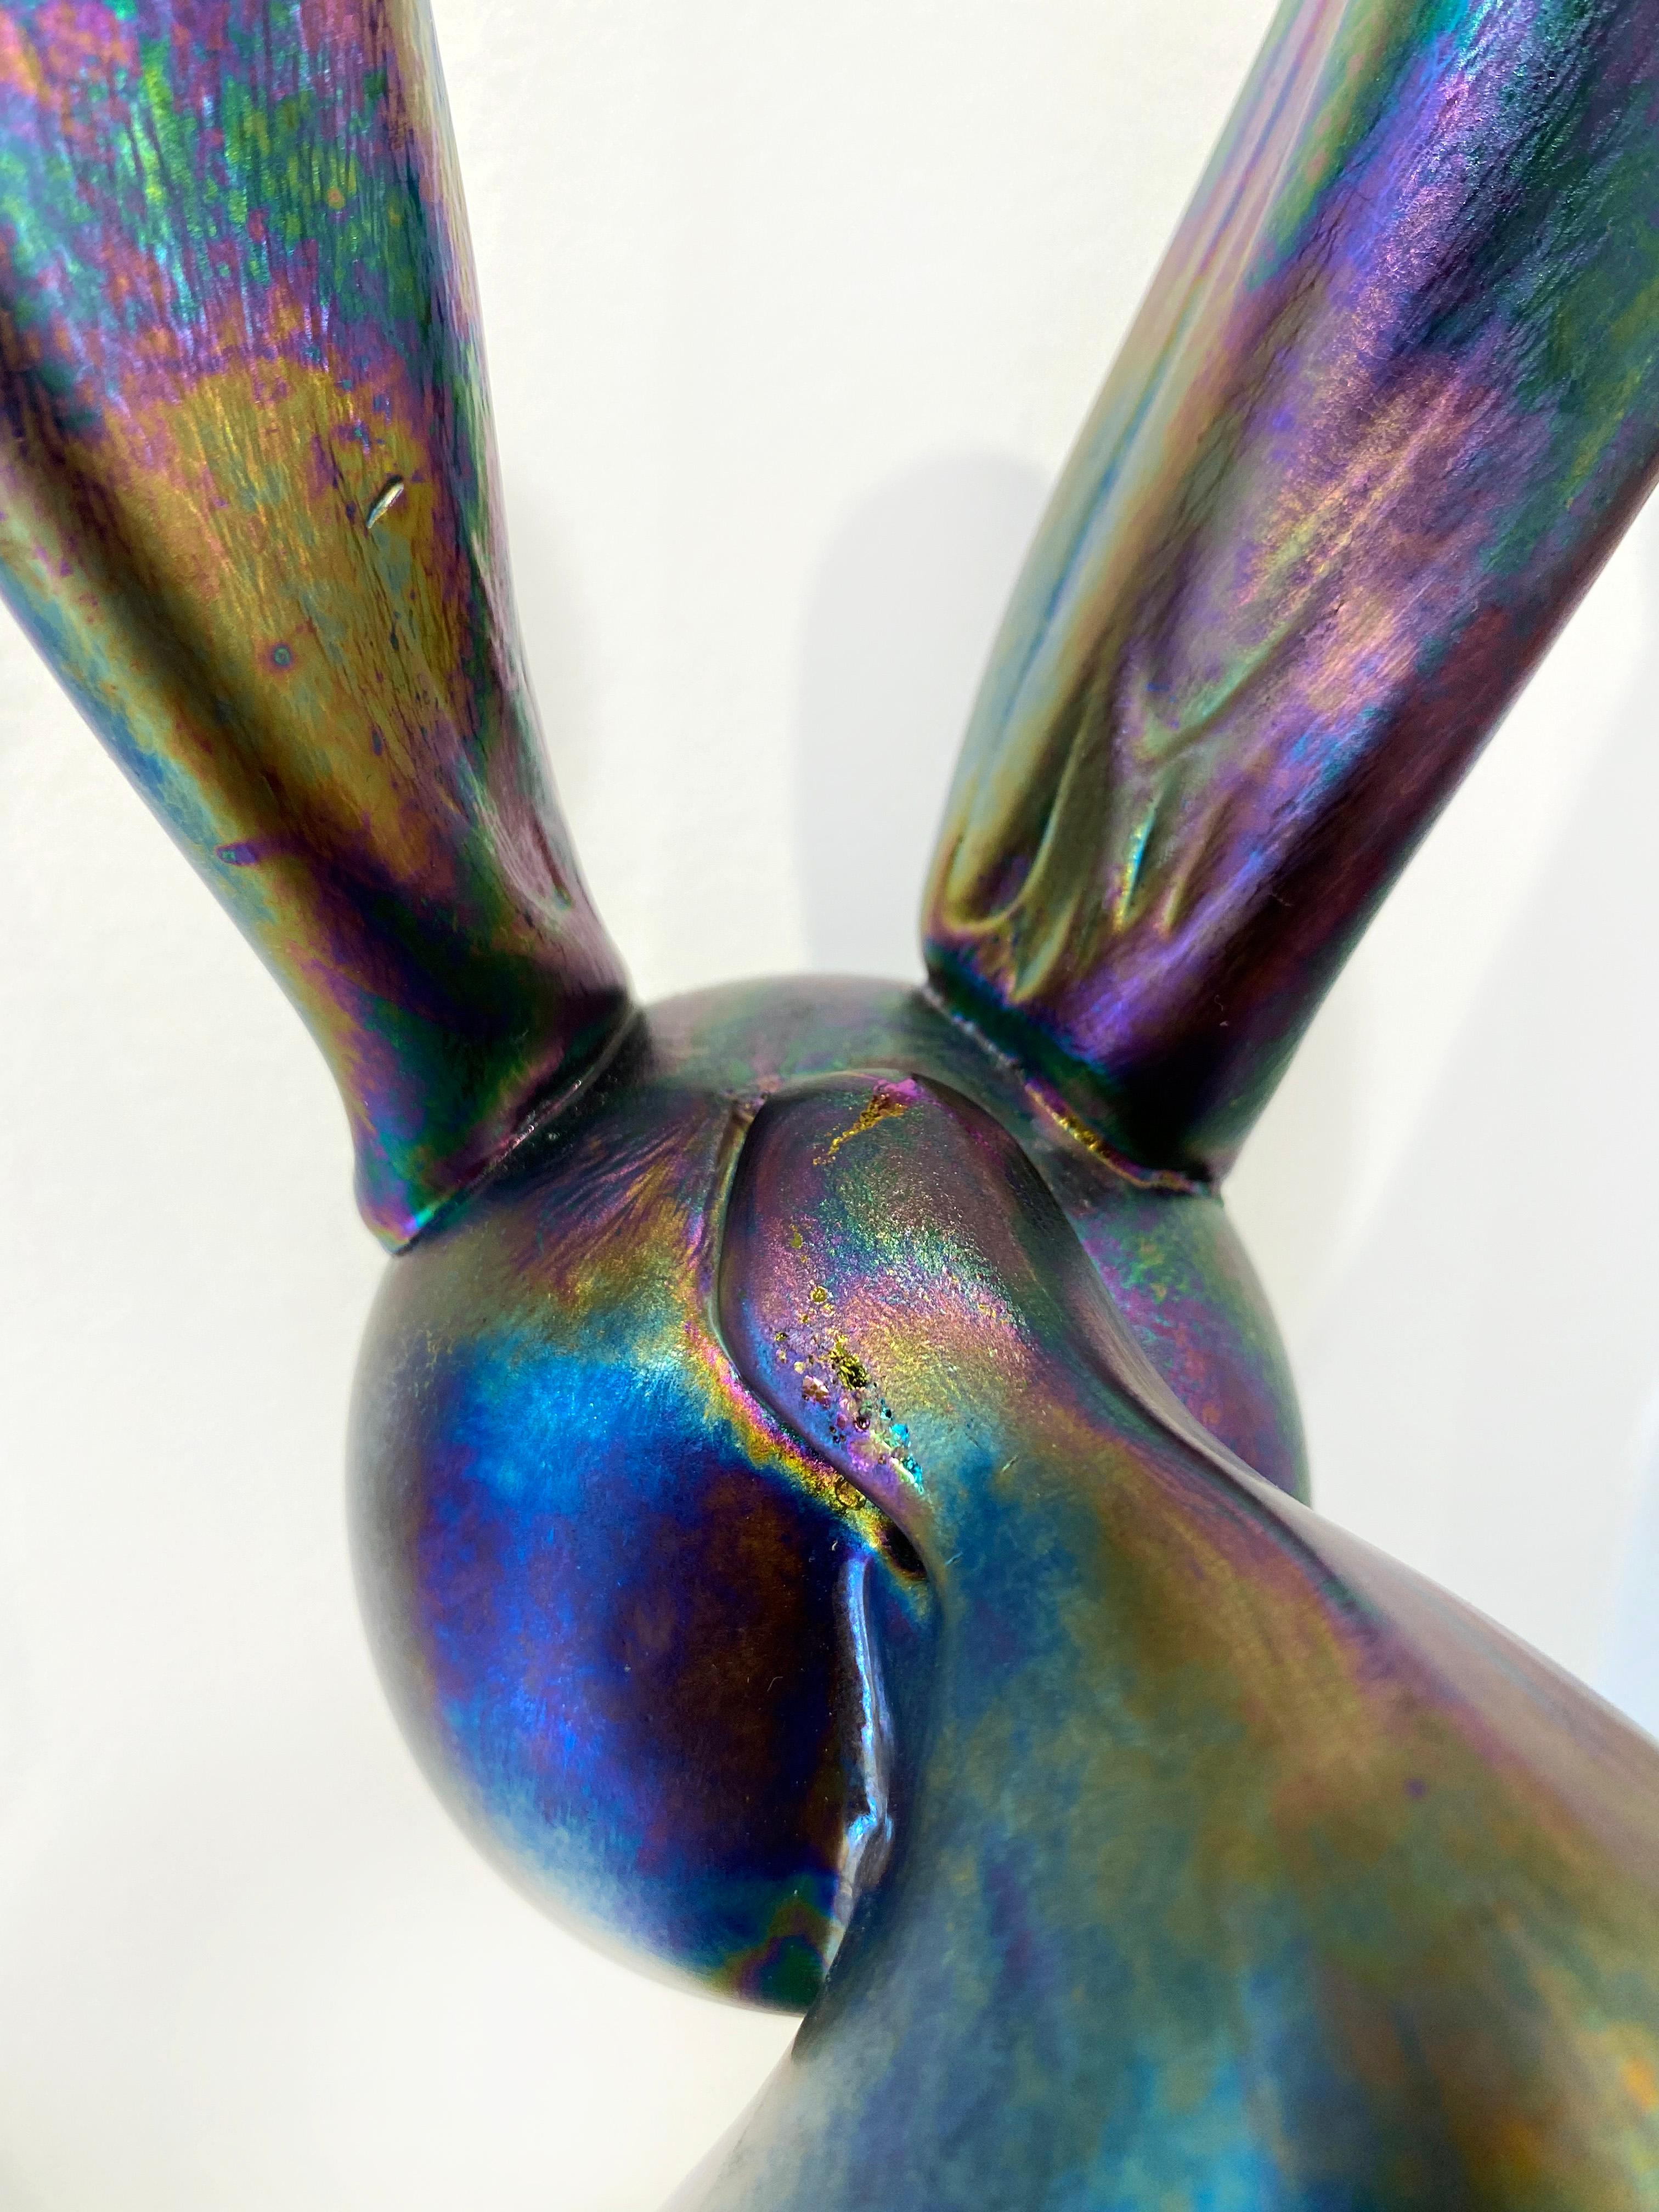 'Jessica' by Hunt Slonem, 2020. Blown-glass sculpture, 16 x 6.5 x 8 in. This glass sculpture depicts one of Slonem's signature bunnies in silver with an irridescent finish that reflects light beautifully, leaving reflected rings of yellow, purple,